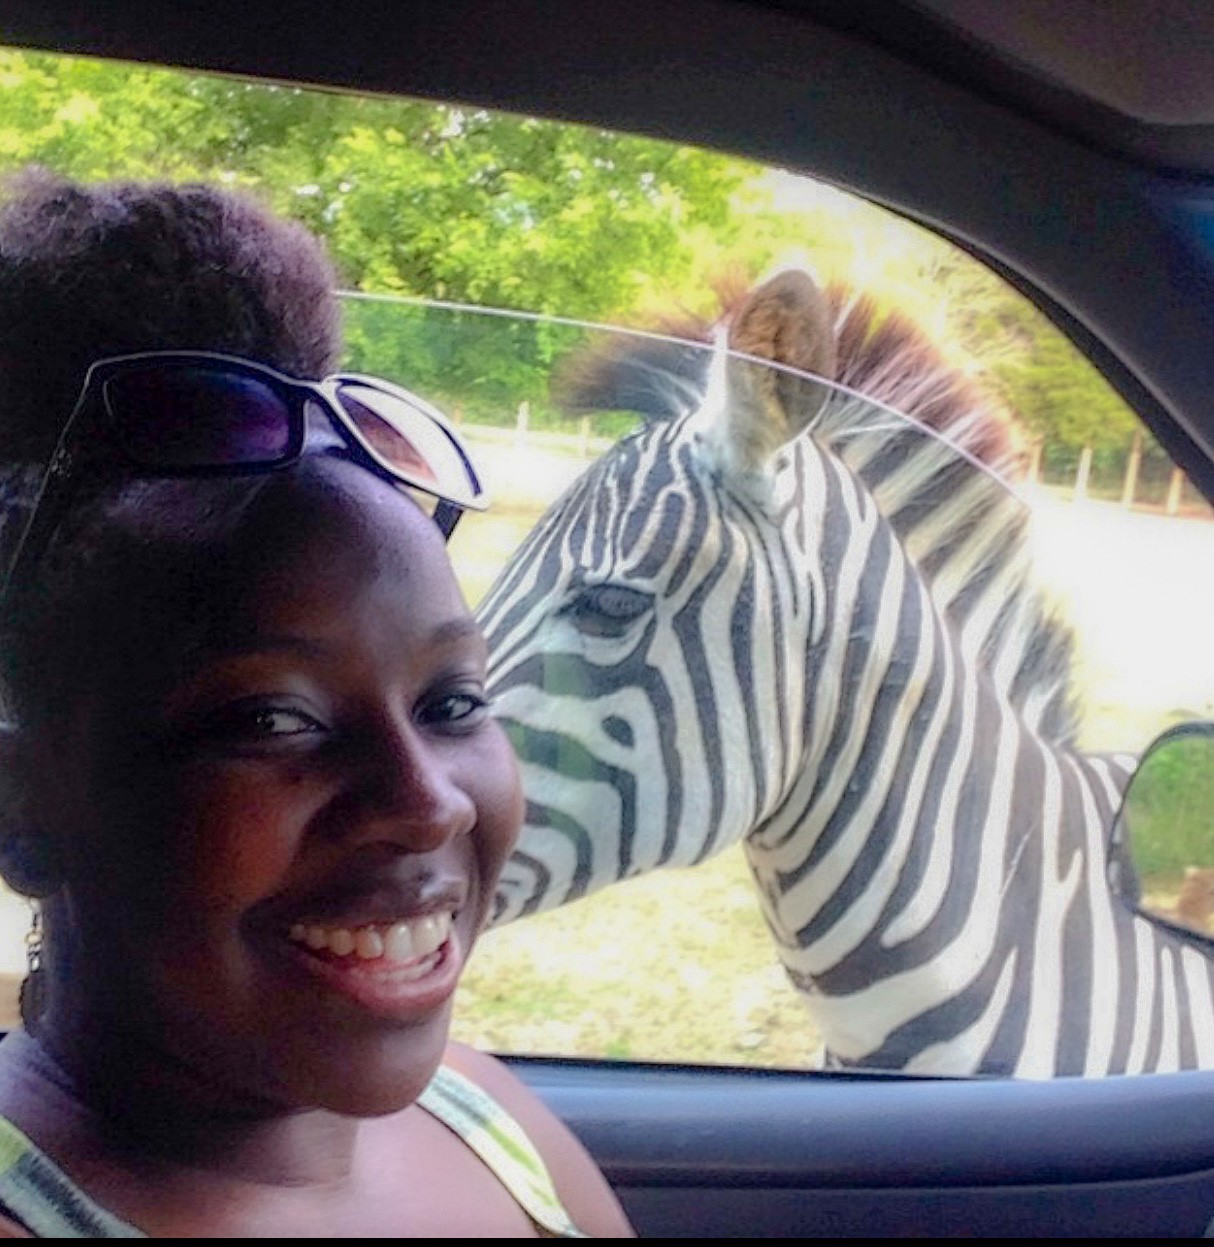 Woman In Car With Zebra In The Window